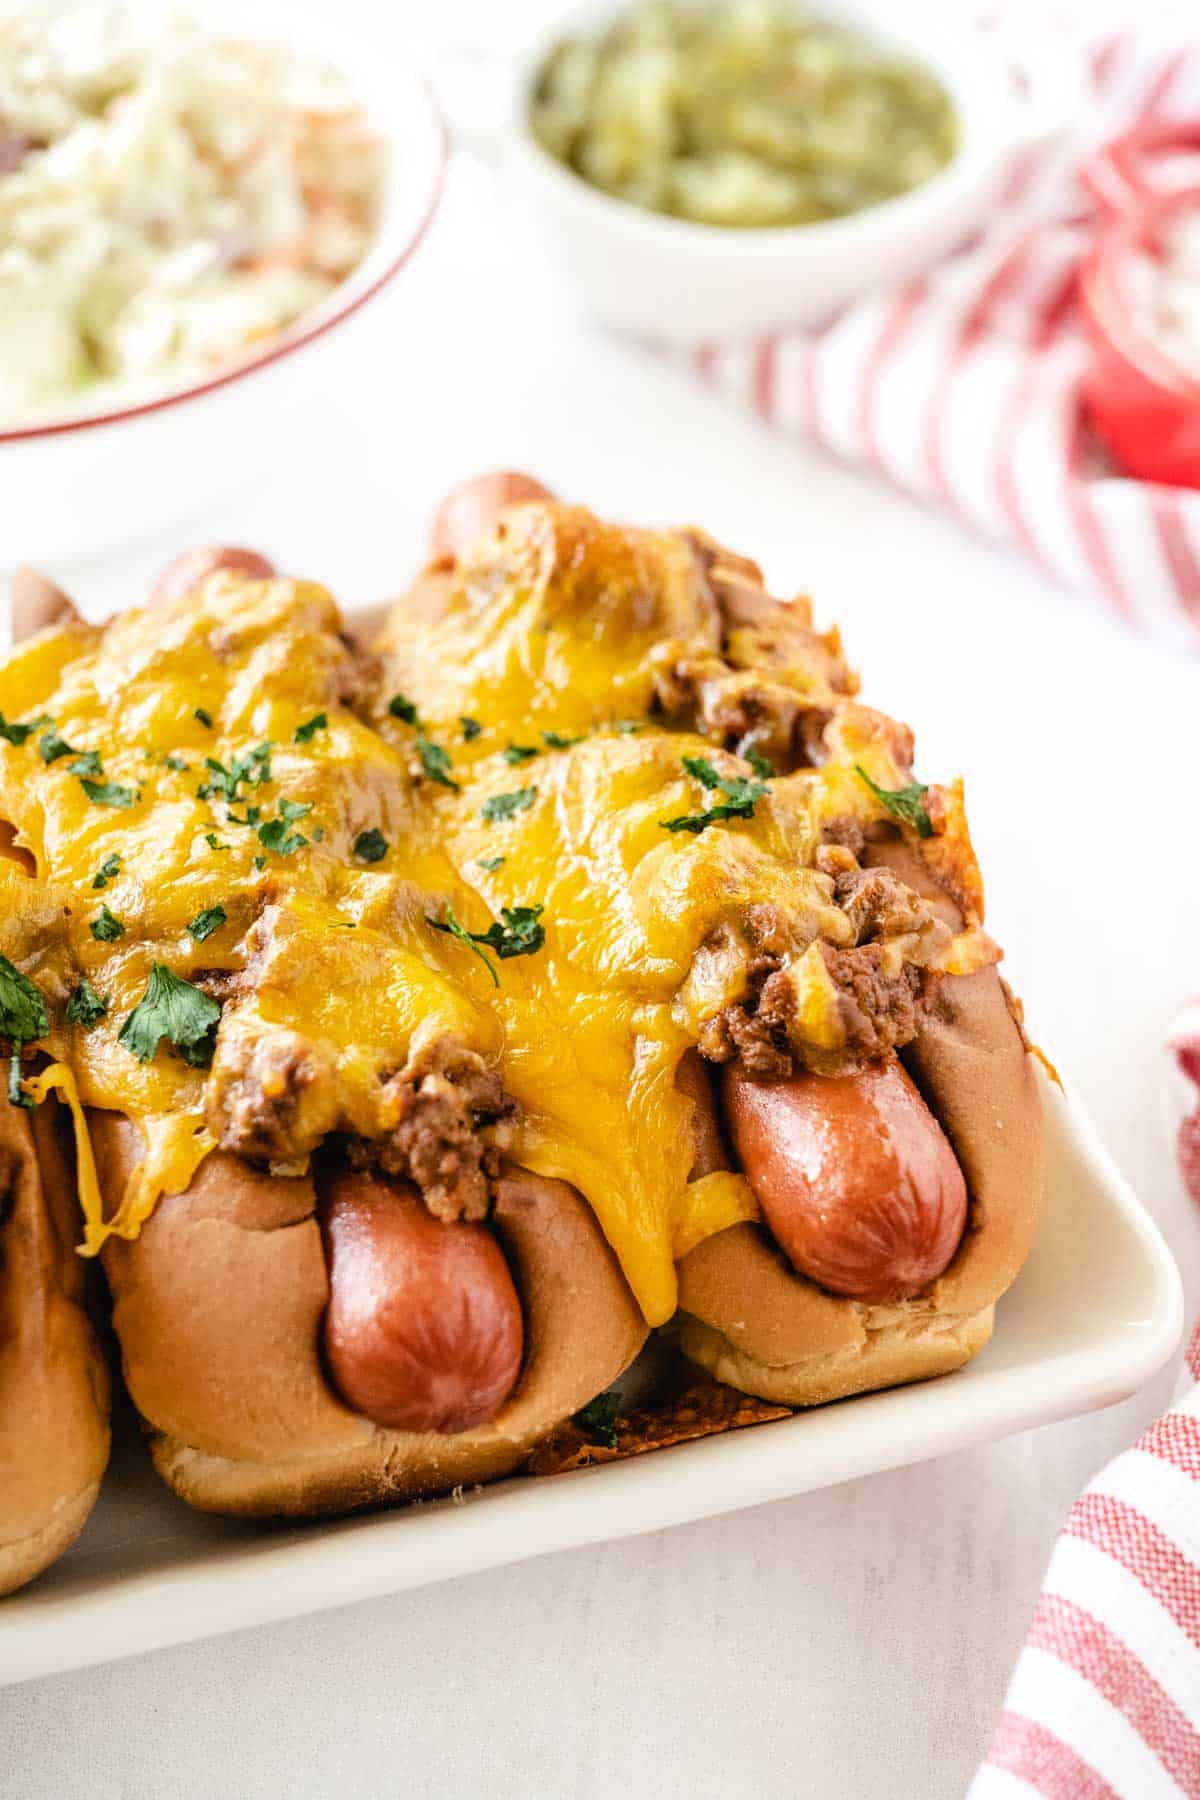 A plate of baked chili cheese dogs with a bowl of slaw and relish in the background.